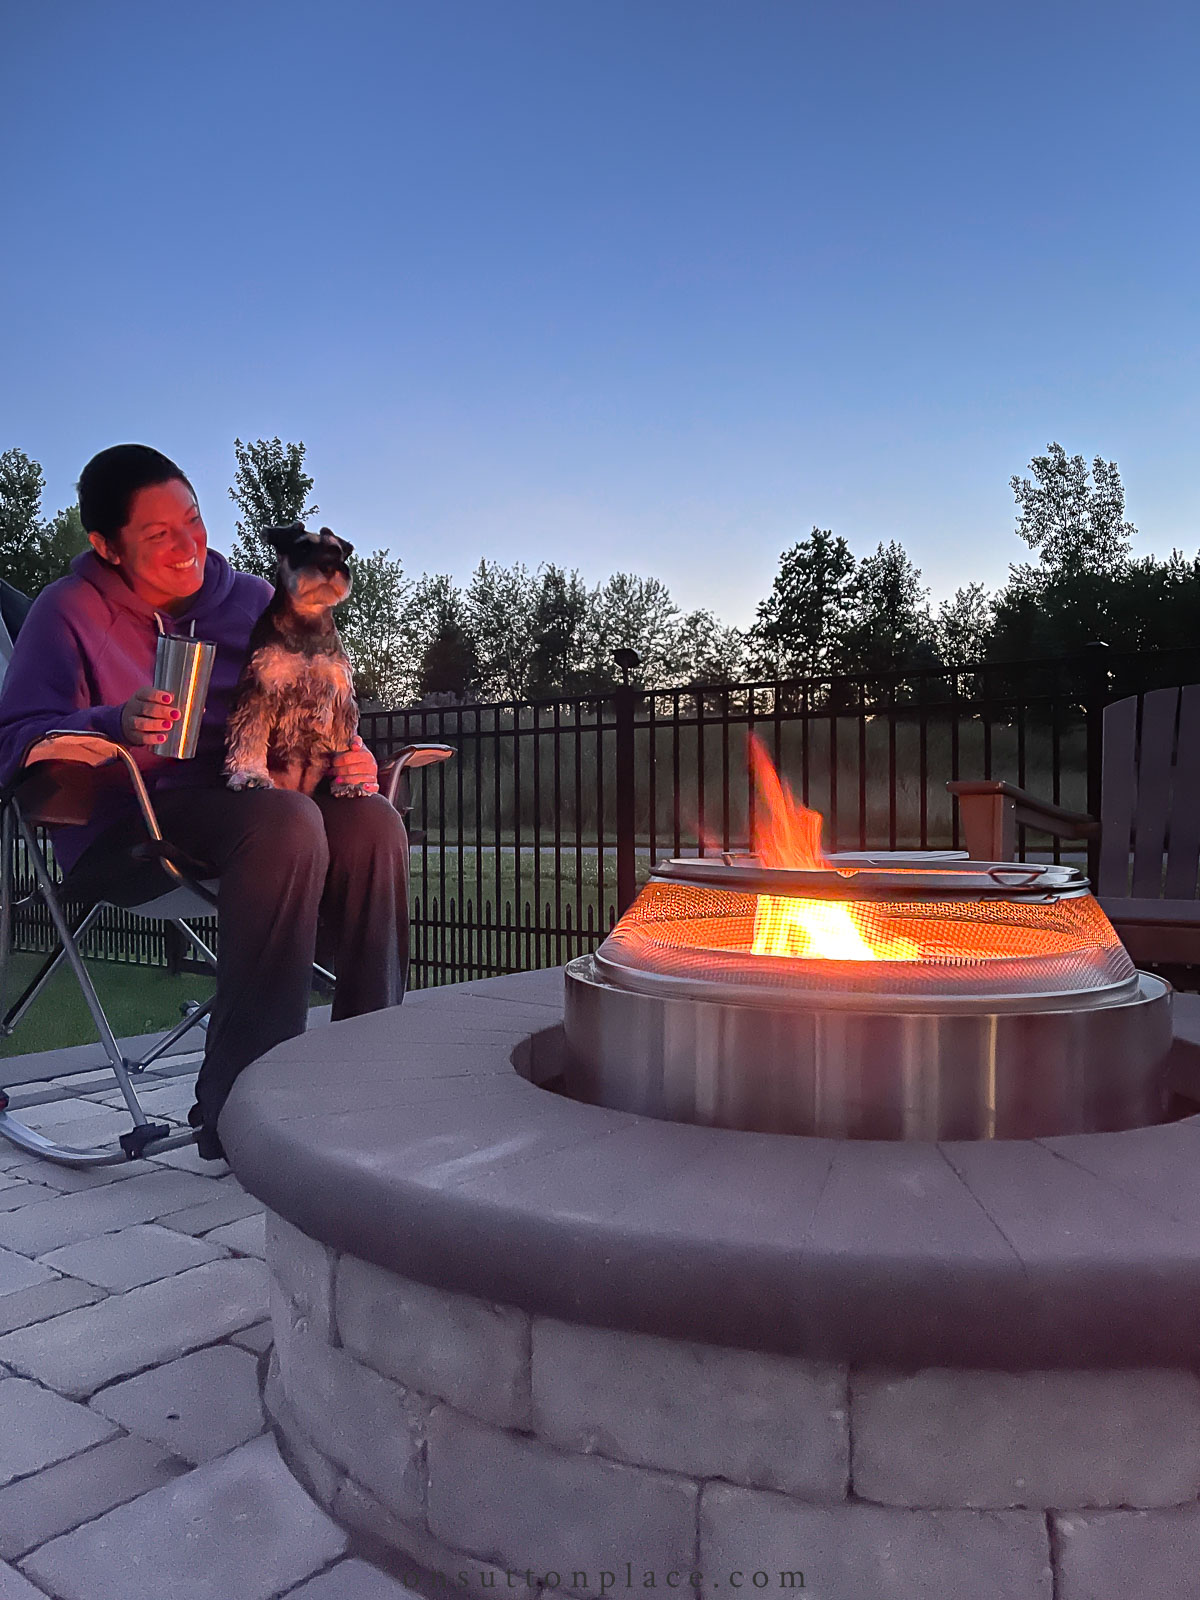 https://www.onsuttonplace.com/wp-content/uploads/2022/06/fire-pit-with-solo-stove.jpg